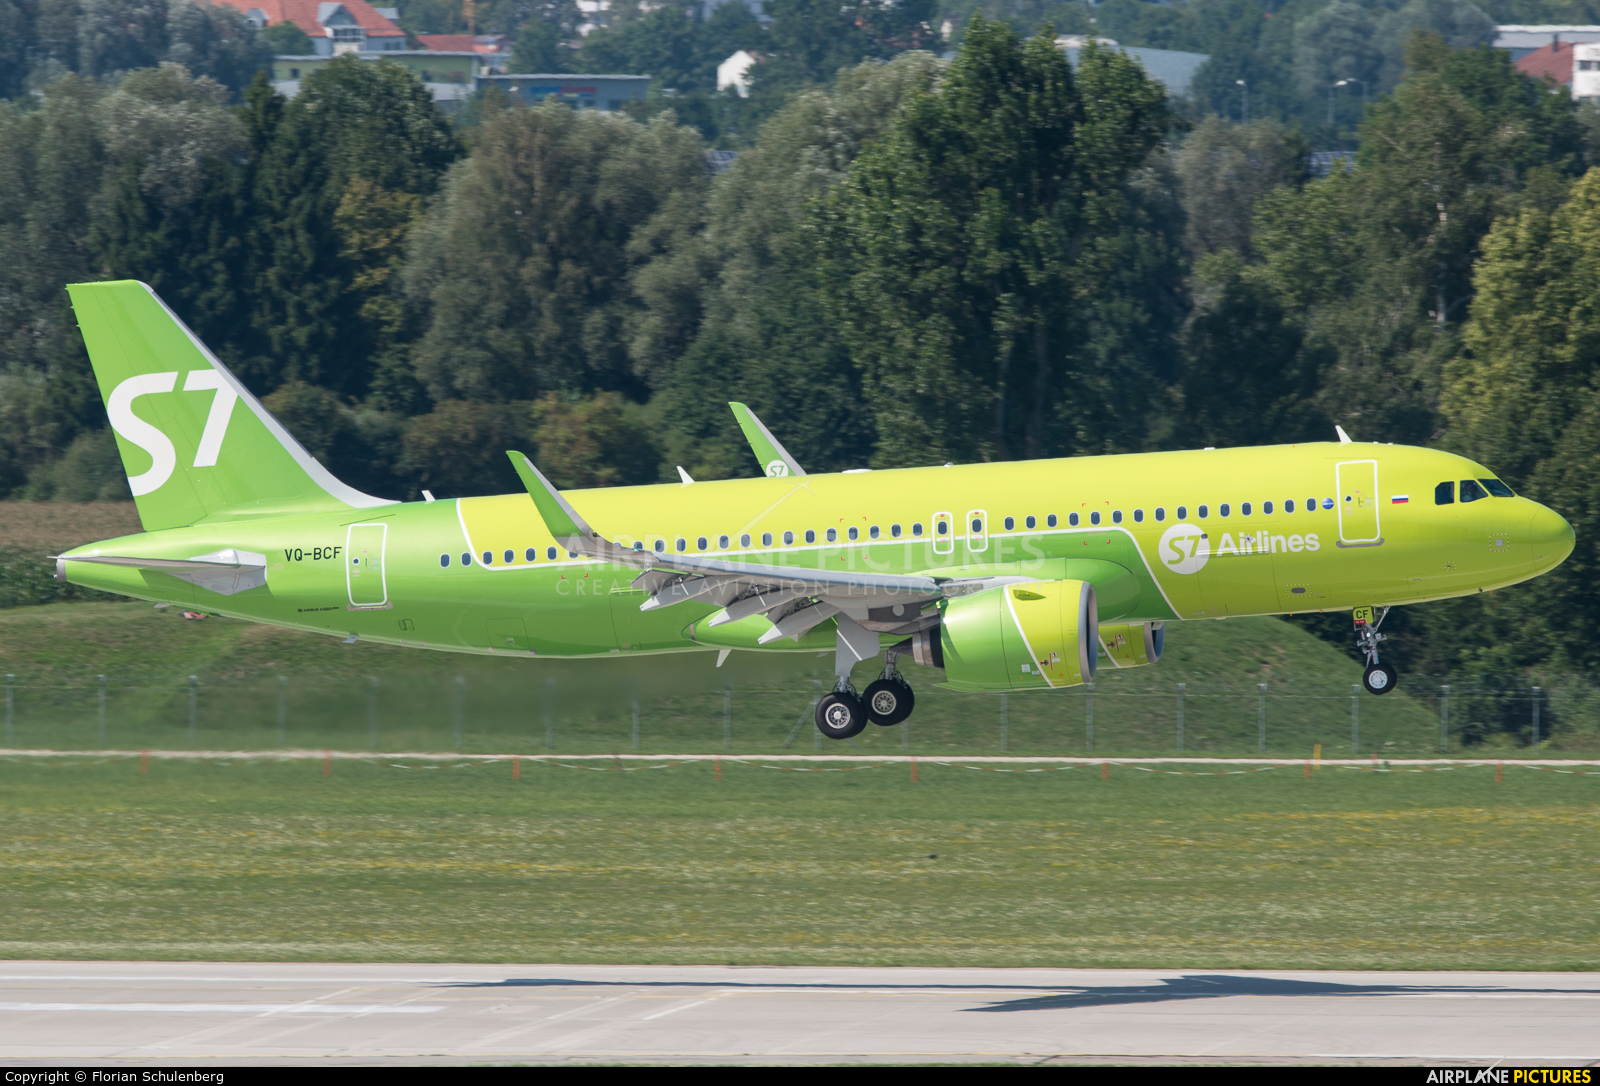 S7 Airlines VQ-BCF aircraft at Munich